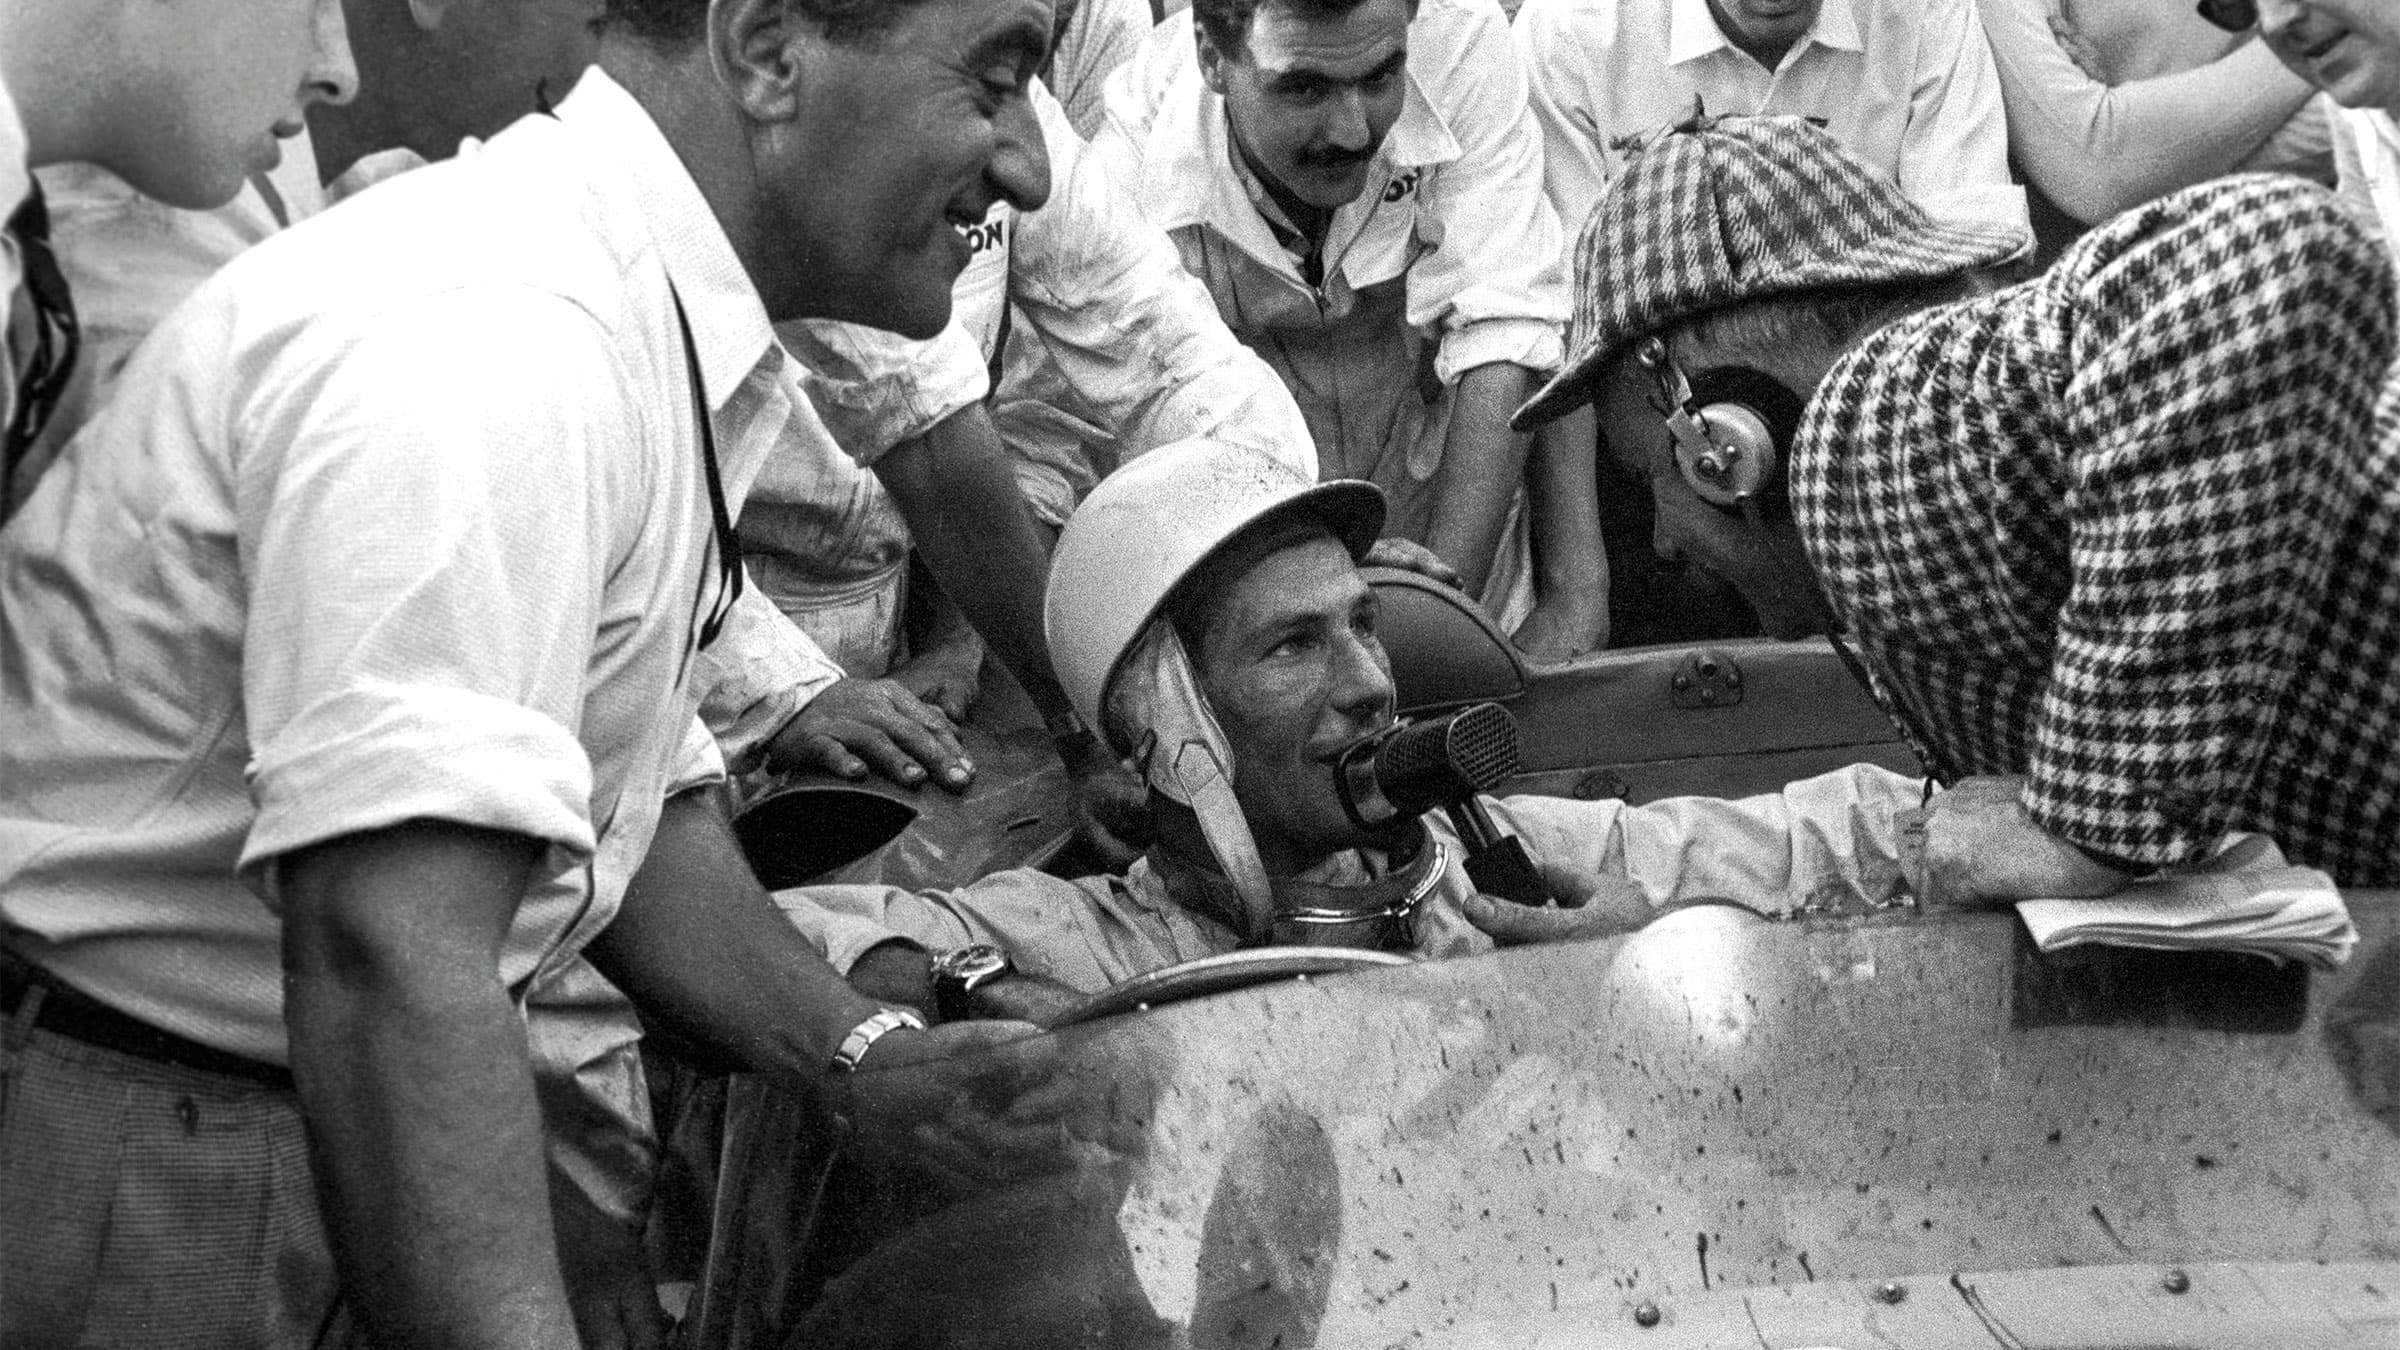 Stirling Moss behind the wheel with the crowd